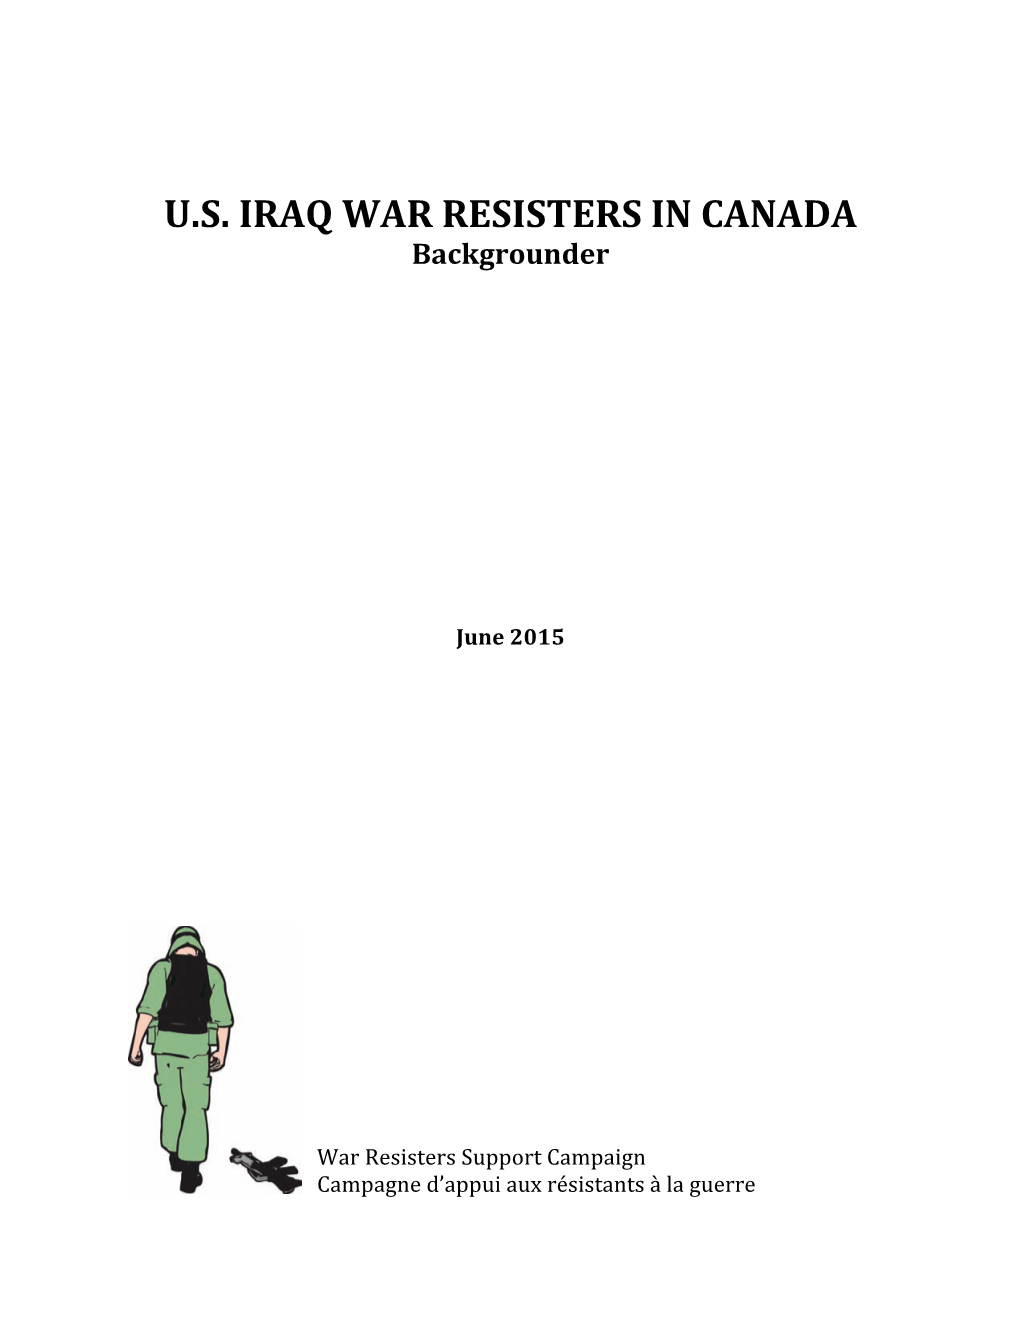 U.S. IRAQ WAR RESISTERS in CANADA Backgrounder